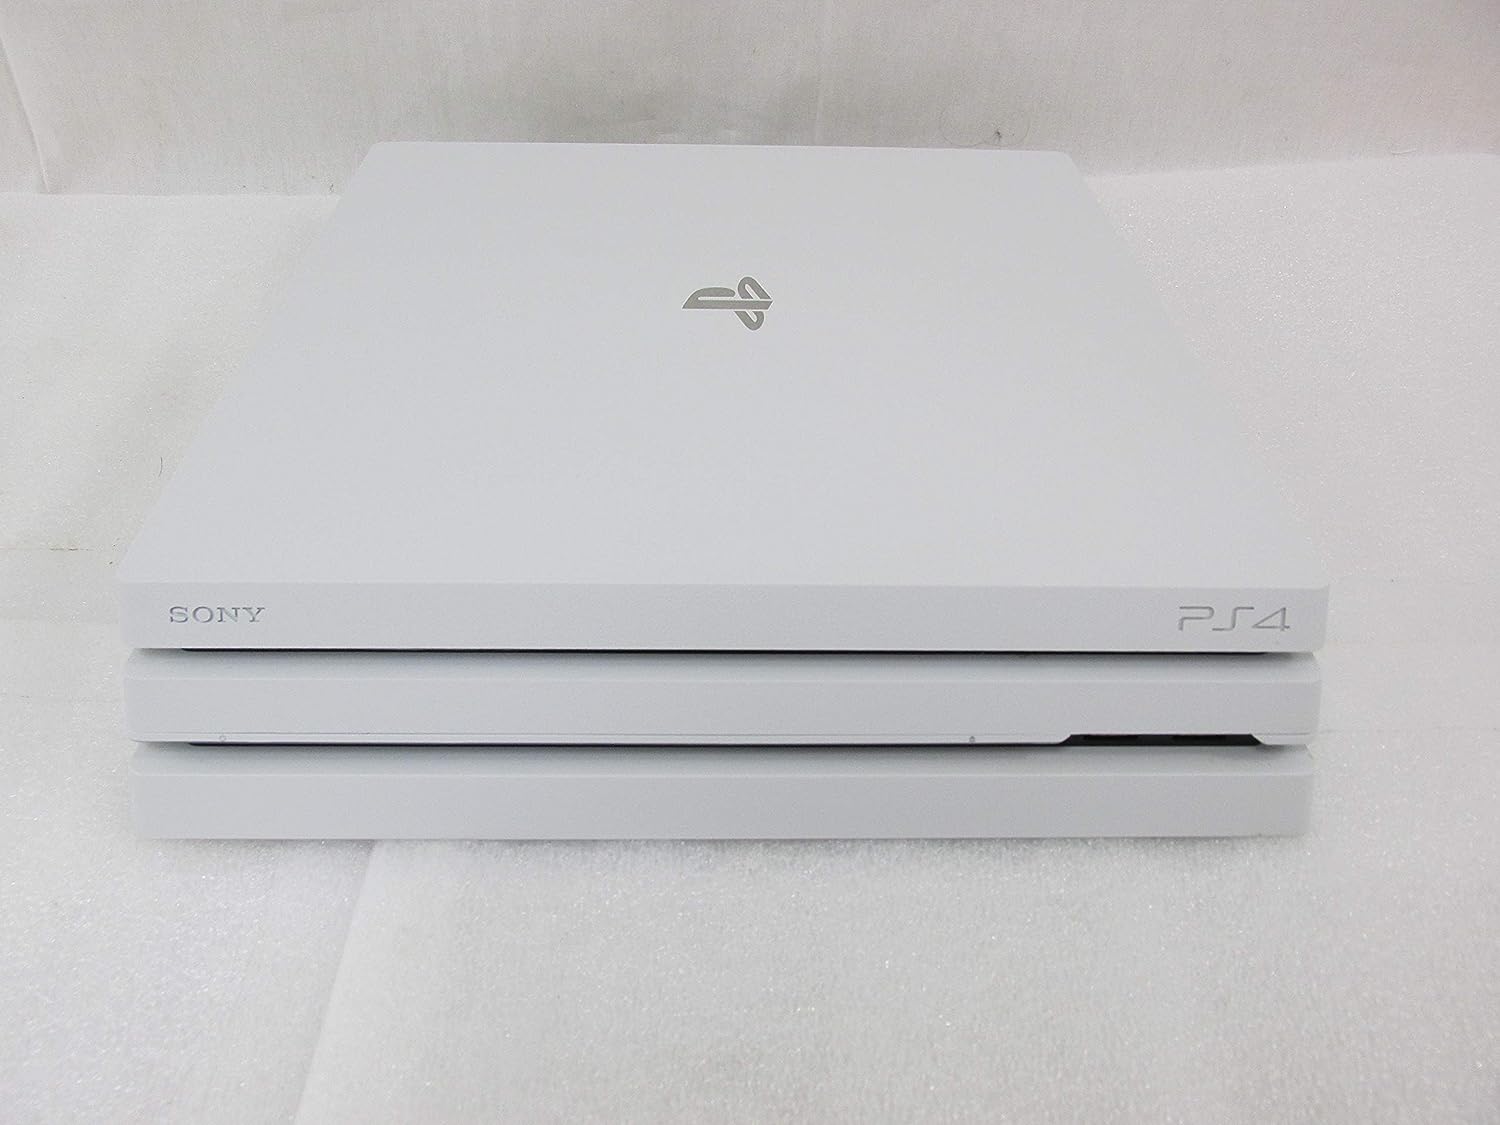 Sony PlayStation 4 Pro Console 1TB HDD w/Accessories - Glacier White (Pre-Owned)